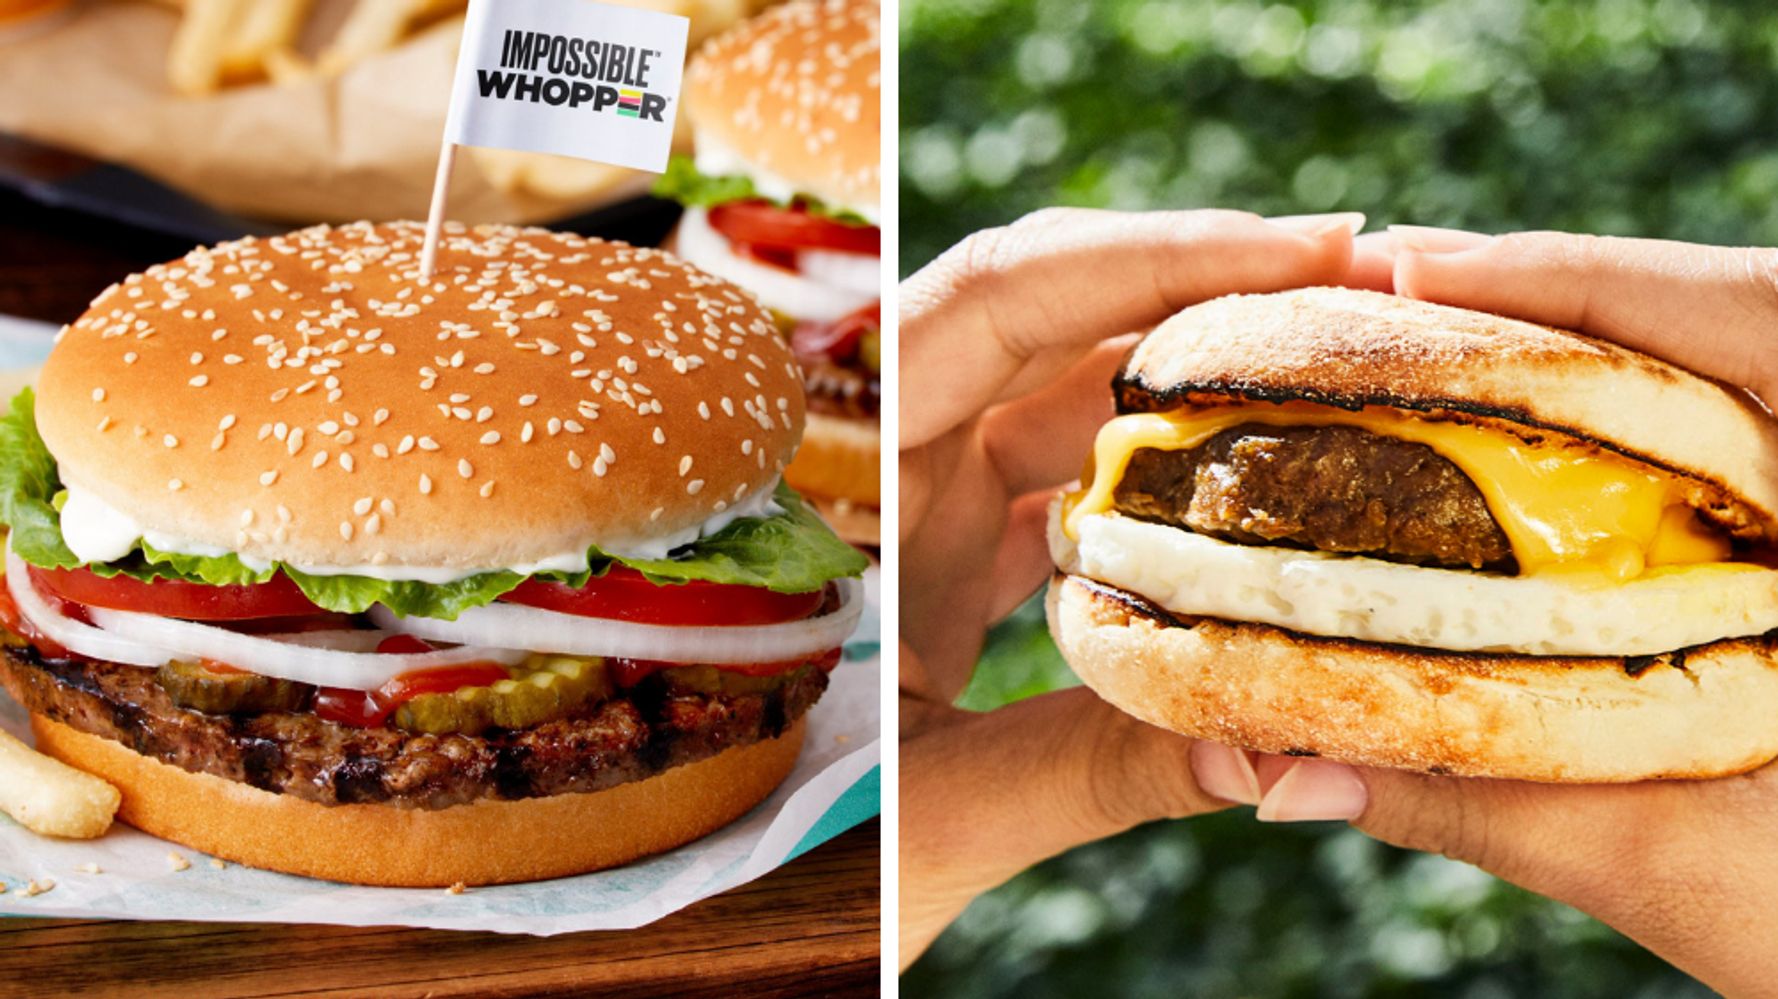 The Best Vegan And Vegetarian Options At Major Fast Food Chains ...